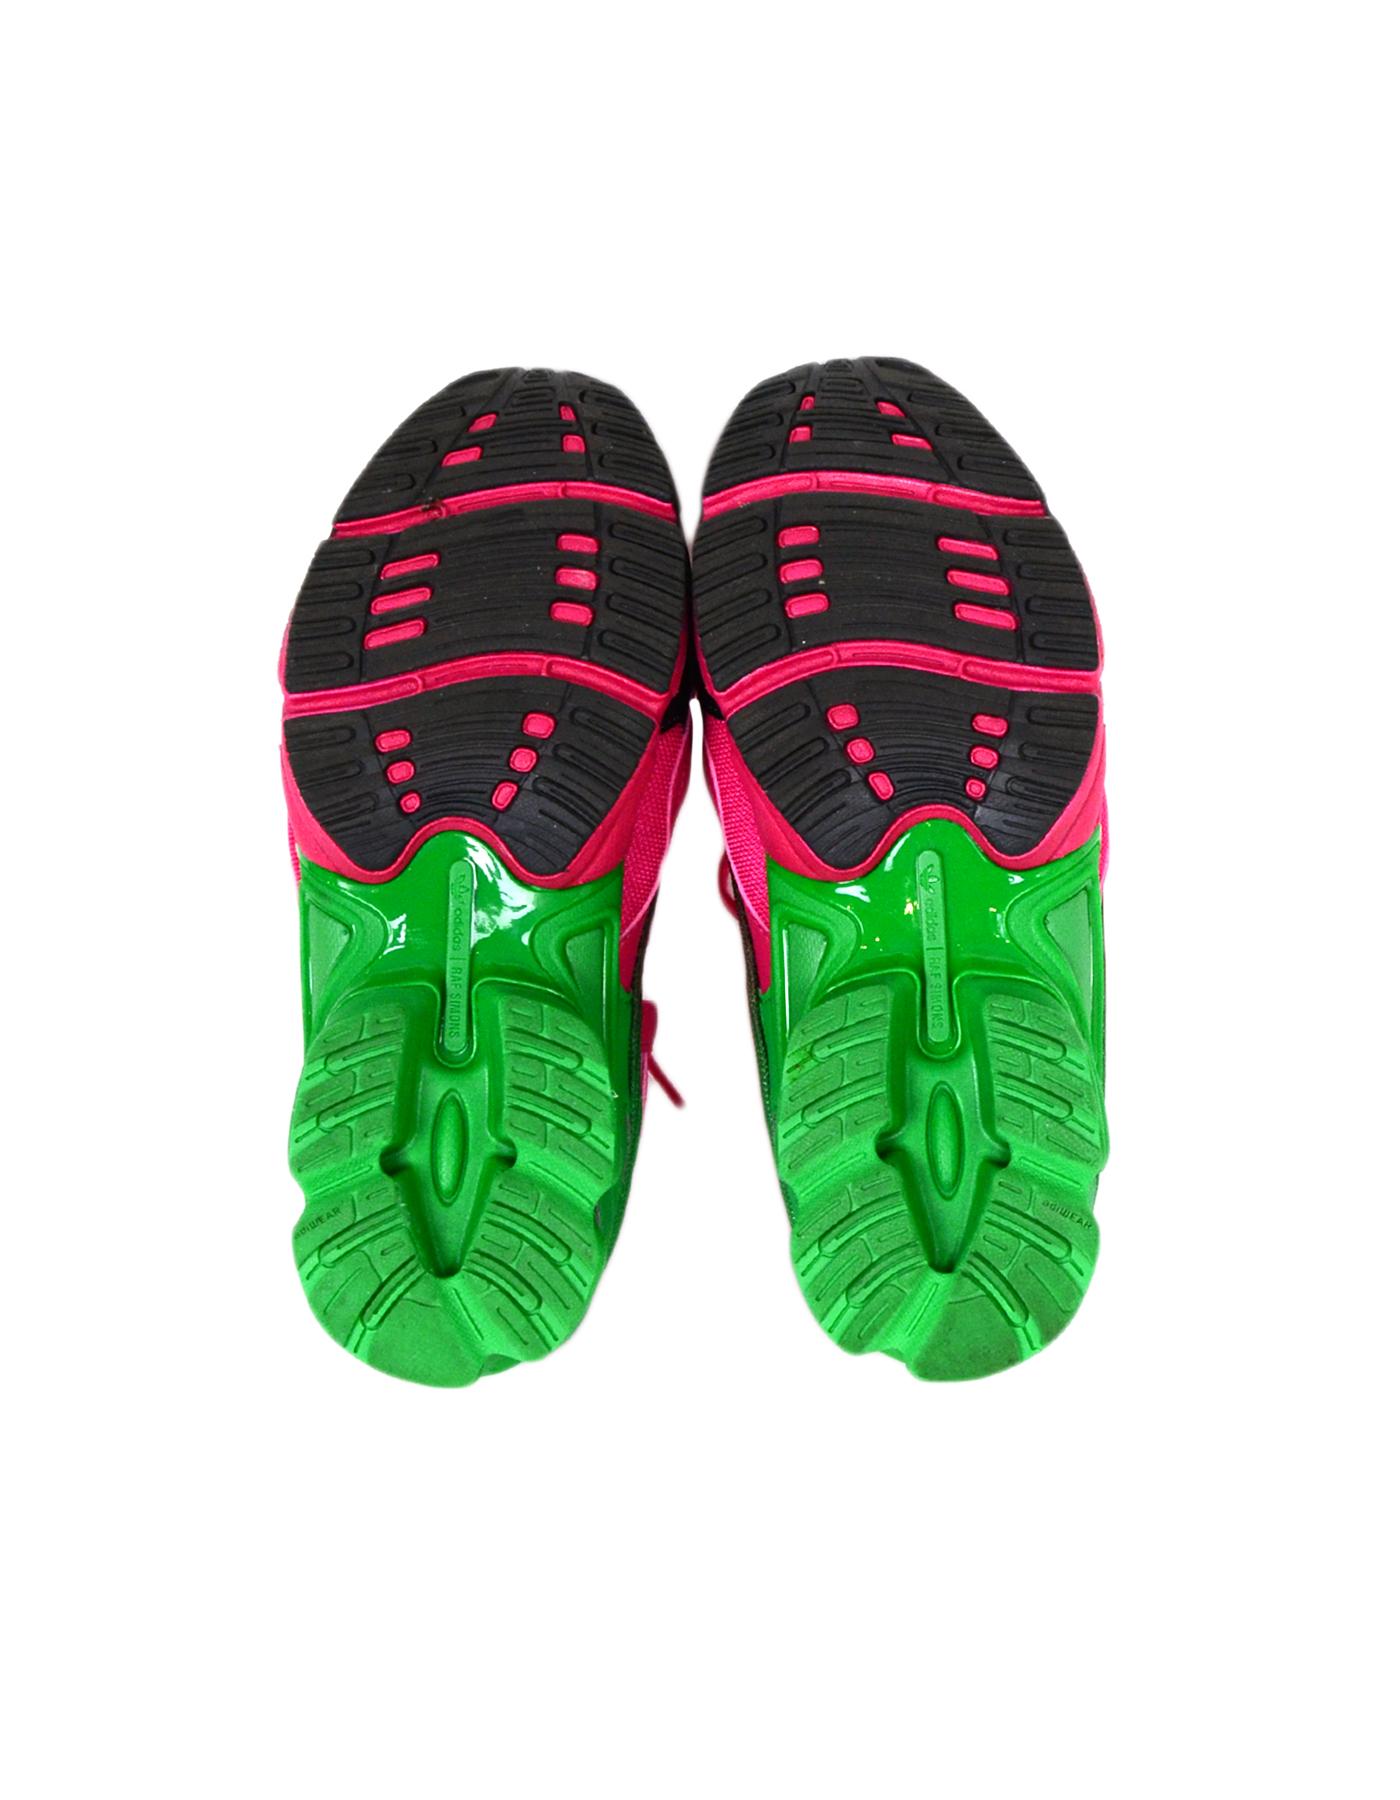 Adidas by Raf Simons Pink/Green/Black Ozweego Replicant Cut Out Sneakers In Excellent Condition In New York, NY